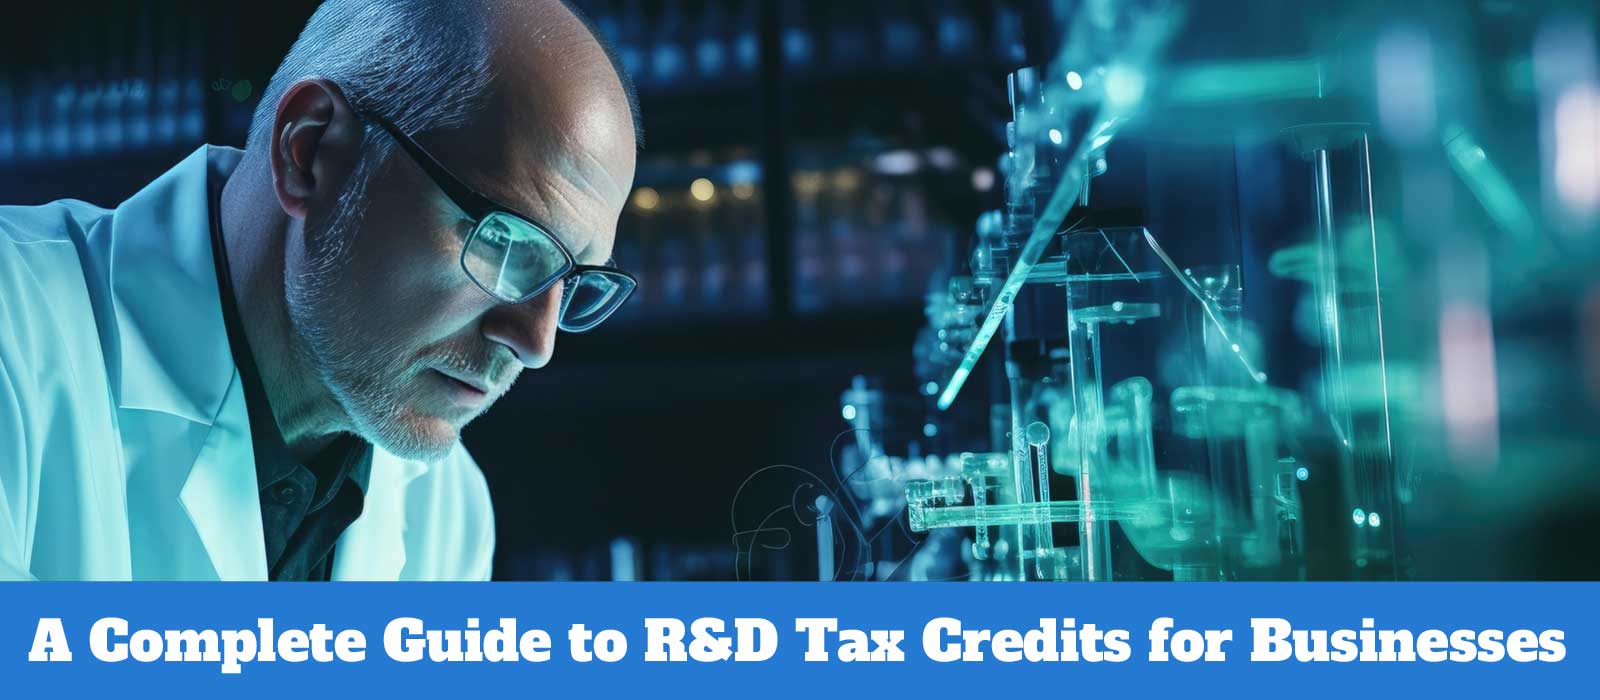 A Complete Guide to R&D Tax Credits for Businesses